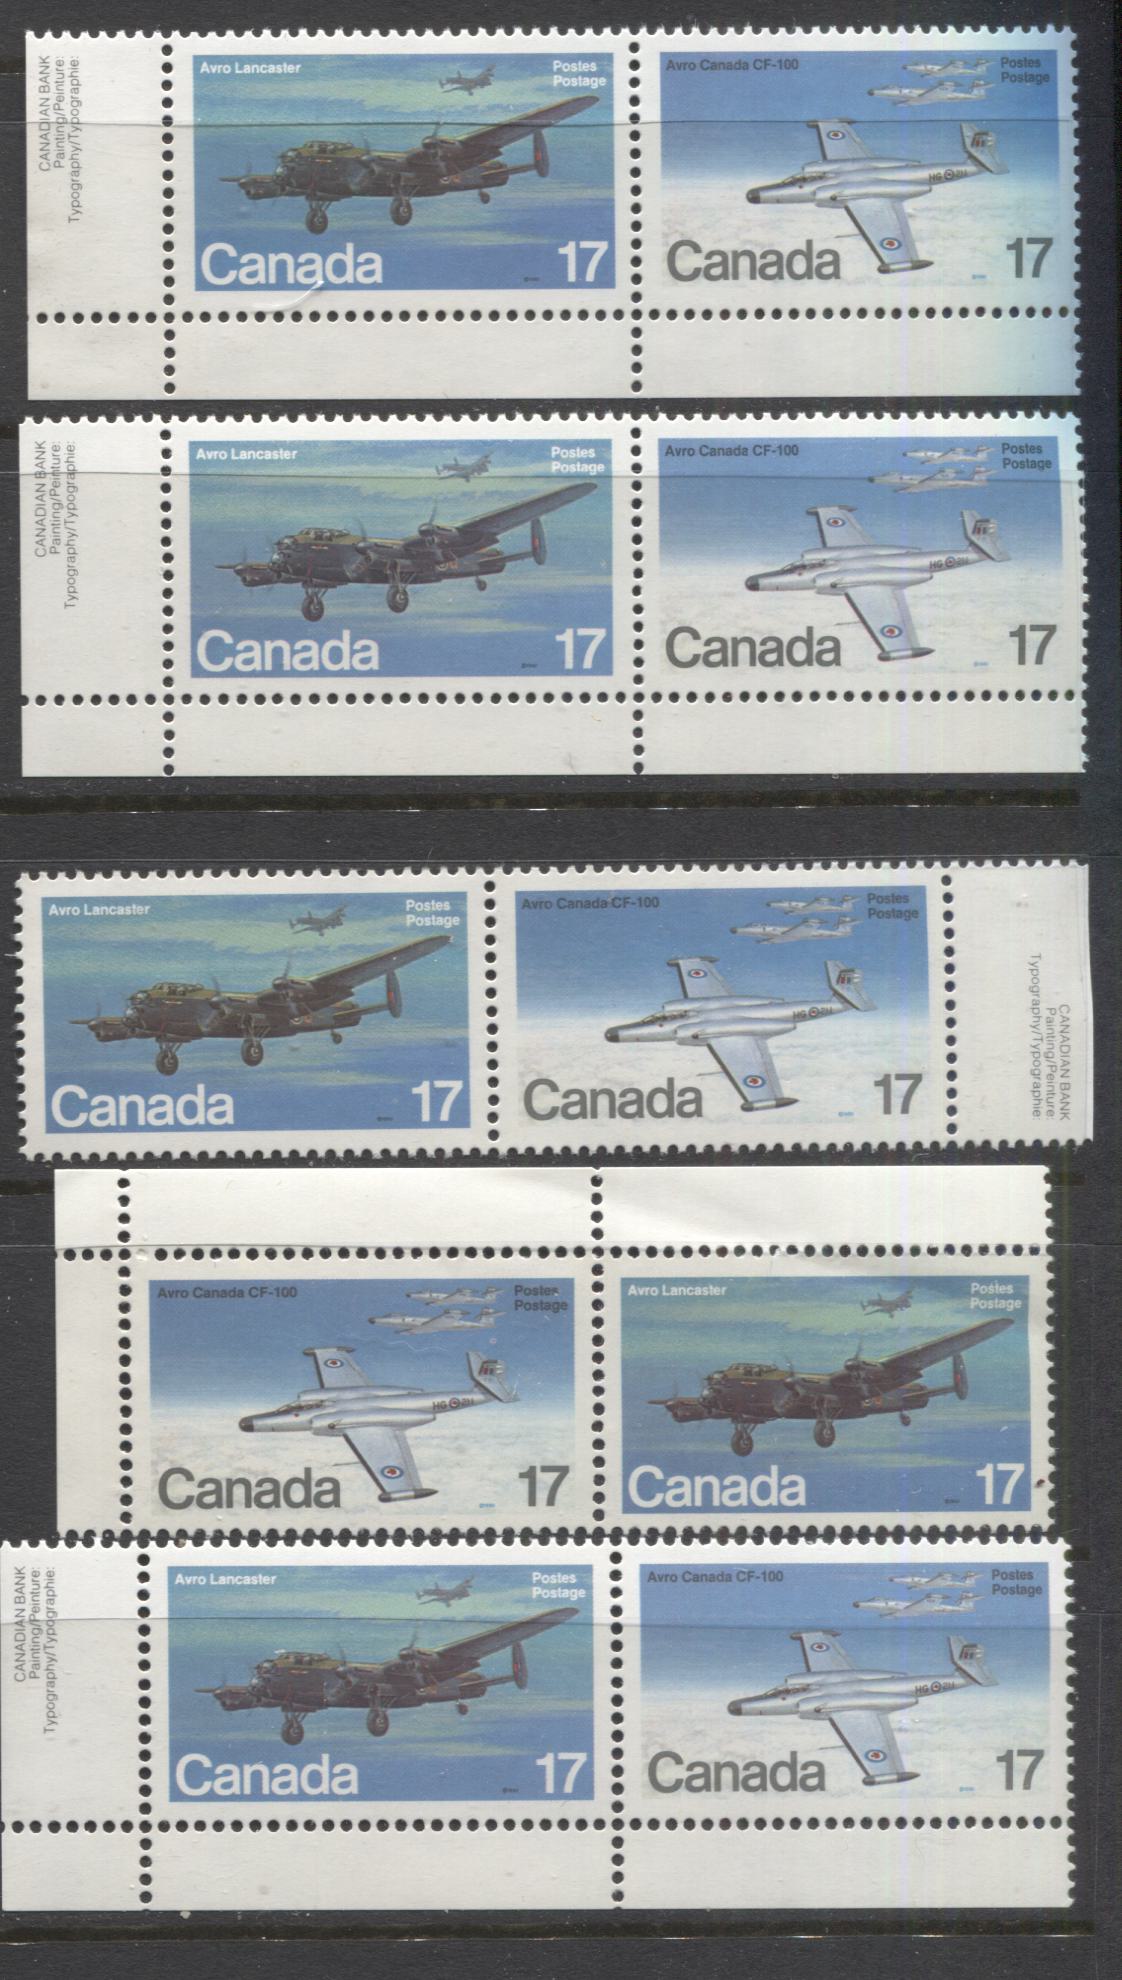 Lot 373 Canada #874a 17c Multicoloured, 1980 Military Aircraft Issue, 5 VFNH Horizontal Se-Tenant Pairs, All With Different Potentially Constant Varieties That Are Different From Other Lots, DF1/DF1 & DF1/DF2 Papers, Possibly Tertiary